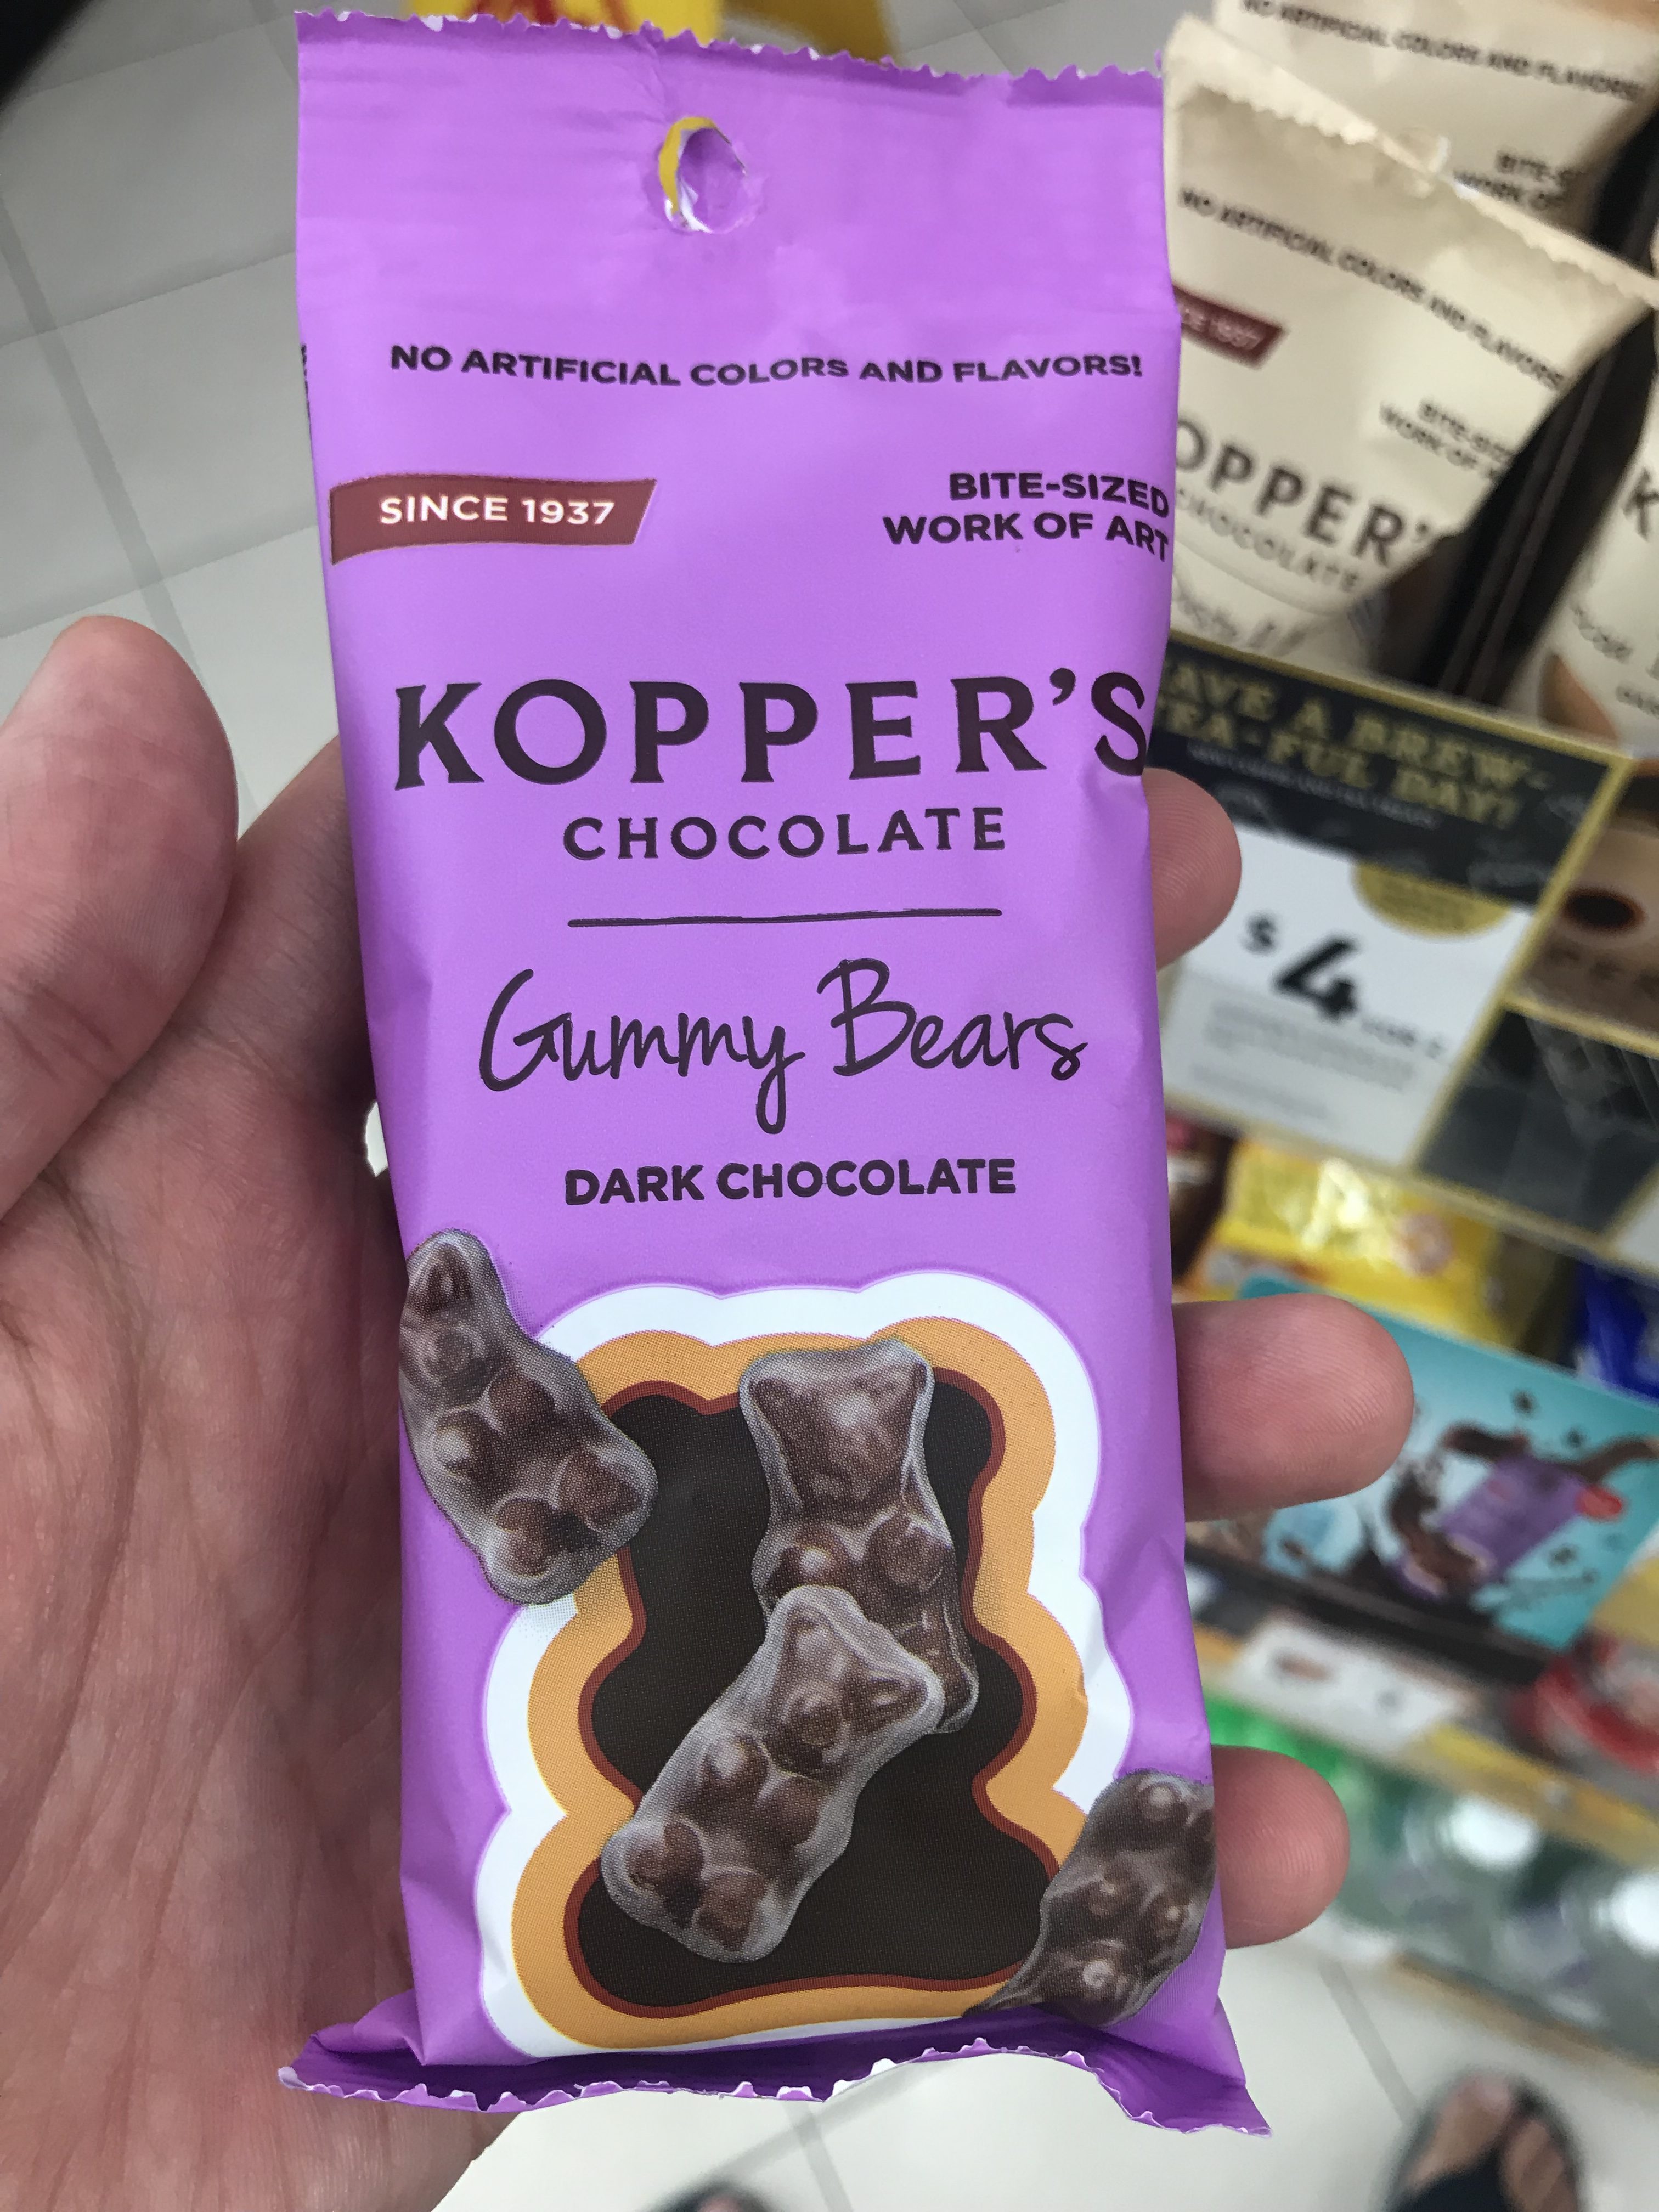 Chocolate-coated gummy bears now available at 7-Eleven at 2-for-$4 - 1